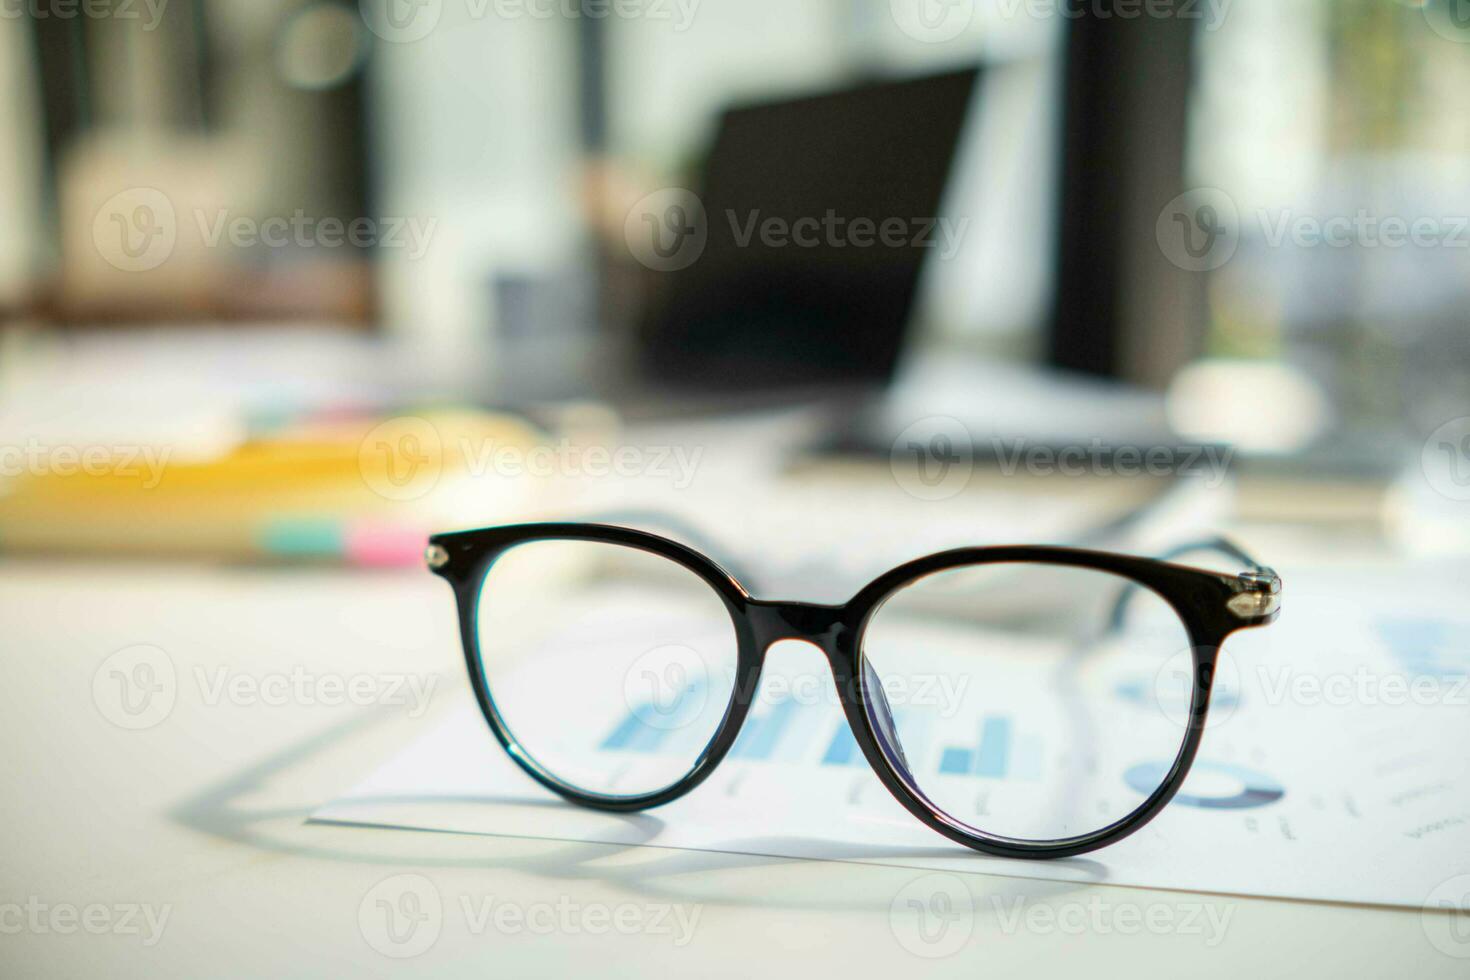 eye glasses placed on the desk are eye glasses that are prepared for people with farsightedness to work and read documents clearly. The concept of wearing eye glasses for normal vision photo